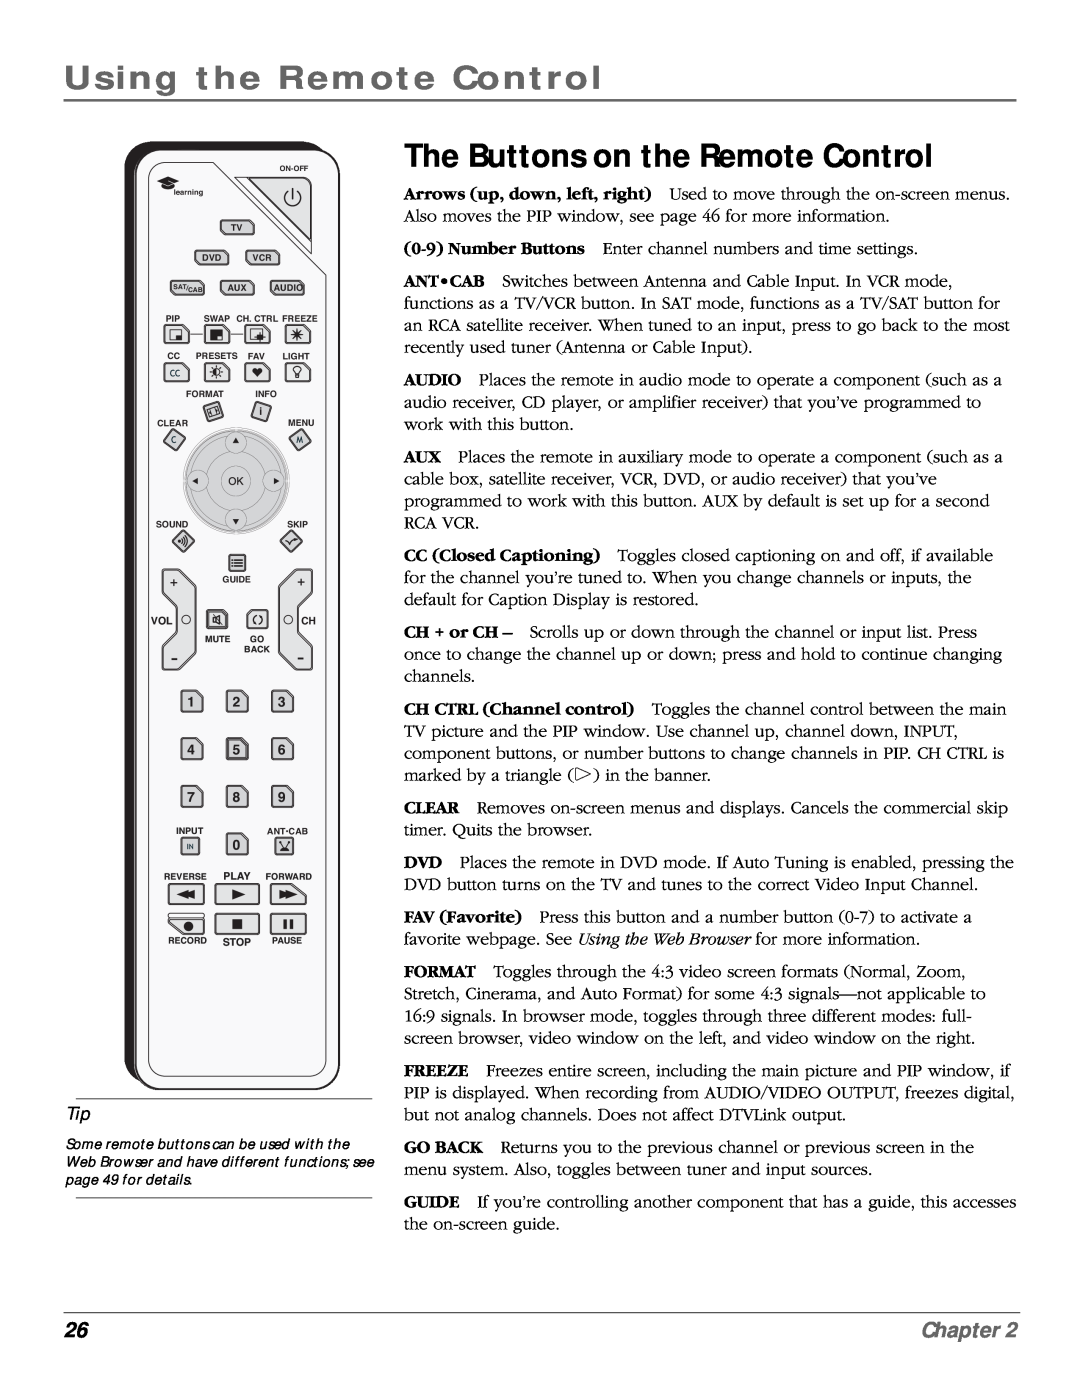 RCA scenium manual Using the Remote Control, The Buttons on the Remote Control, Chapter 